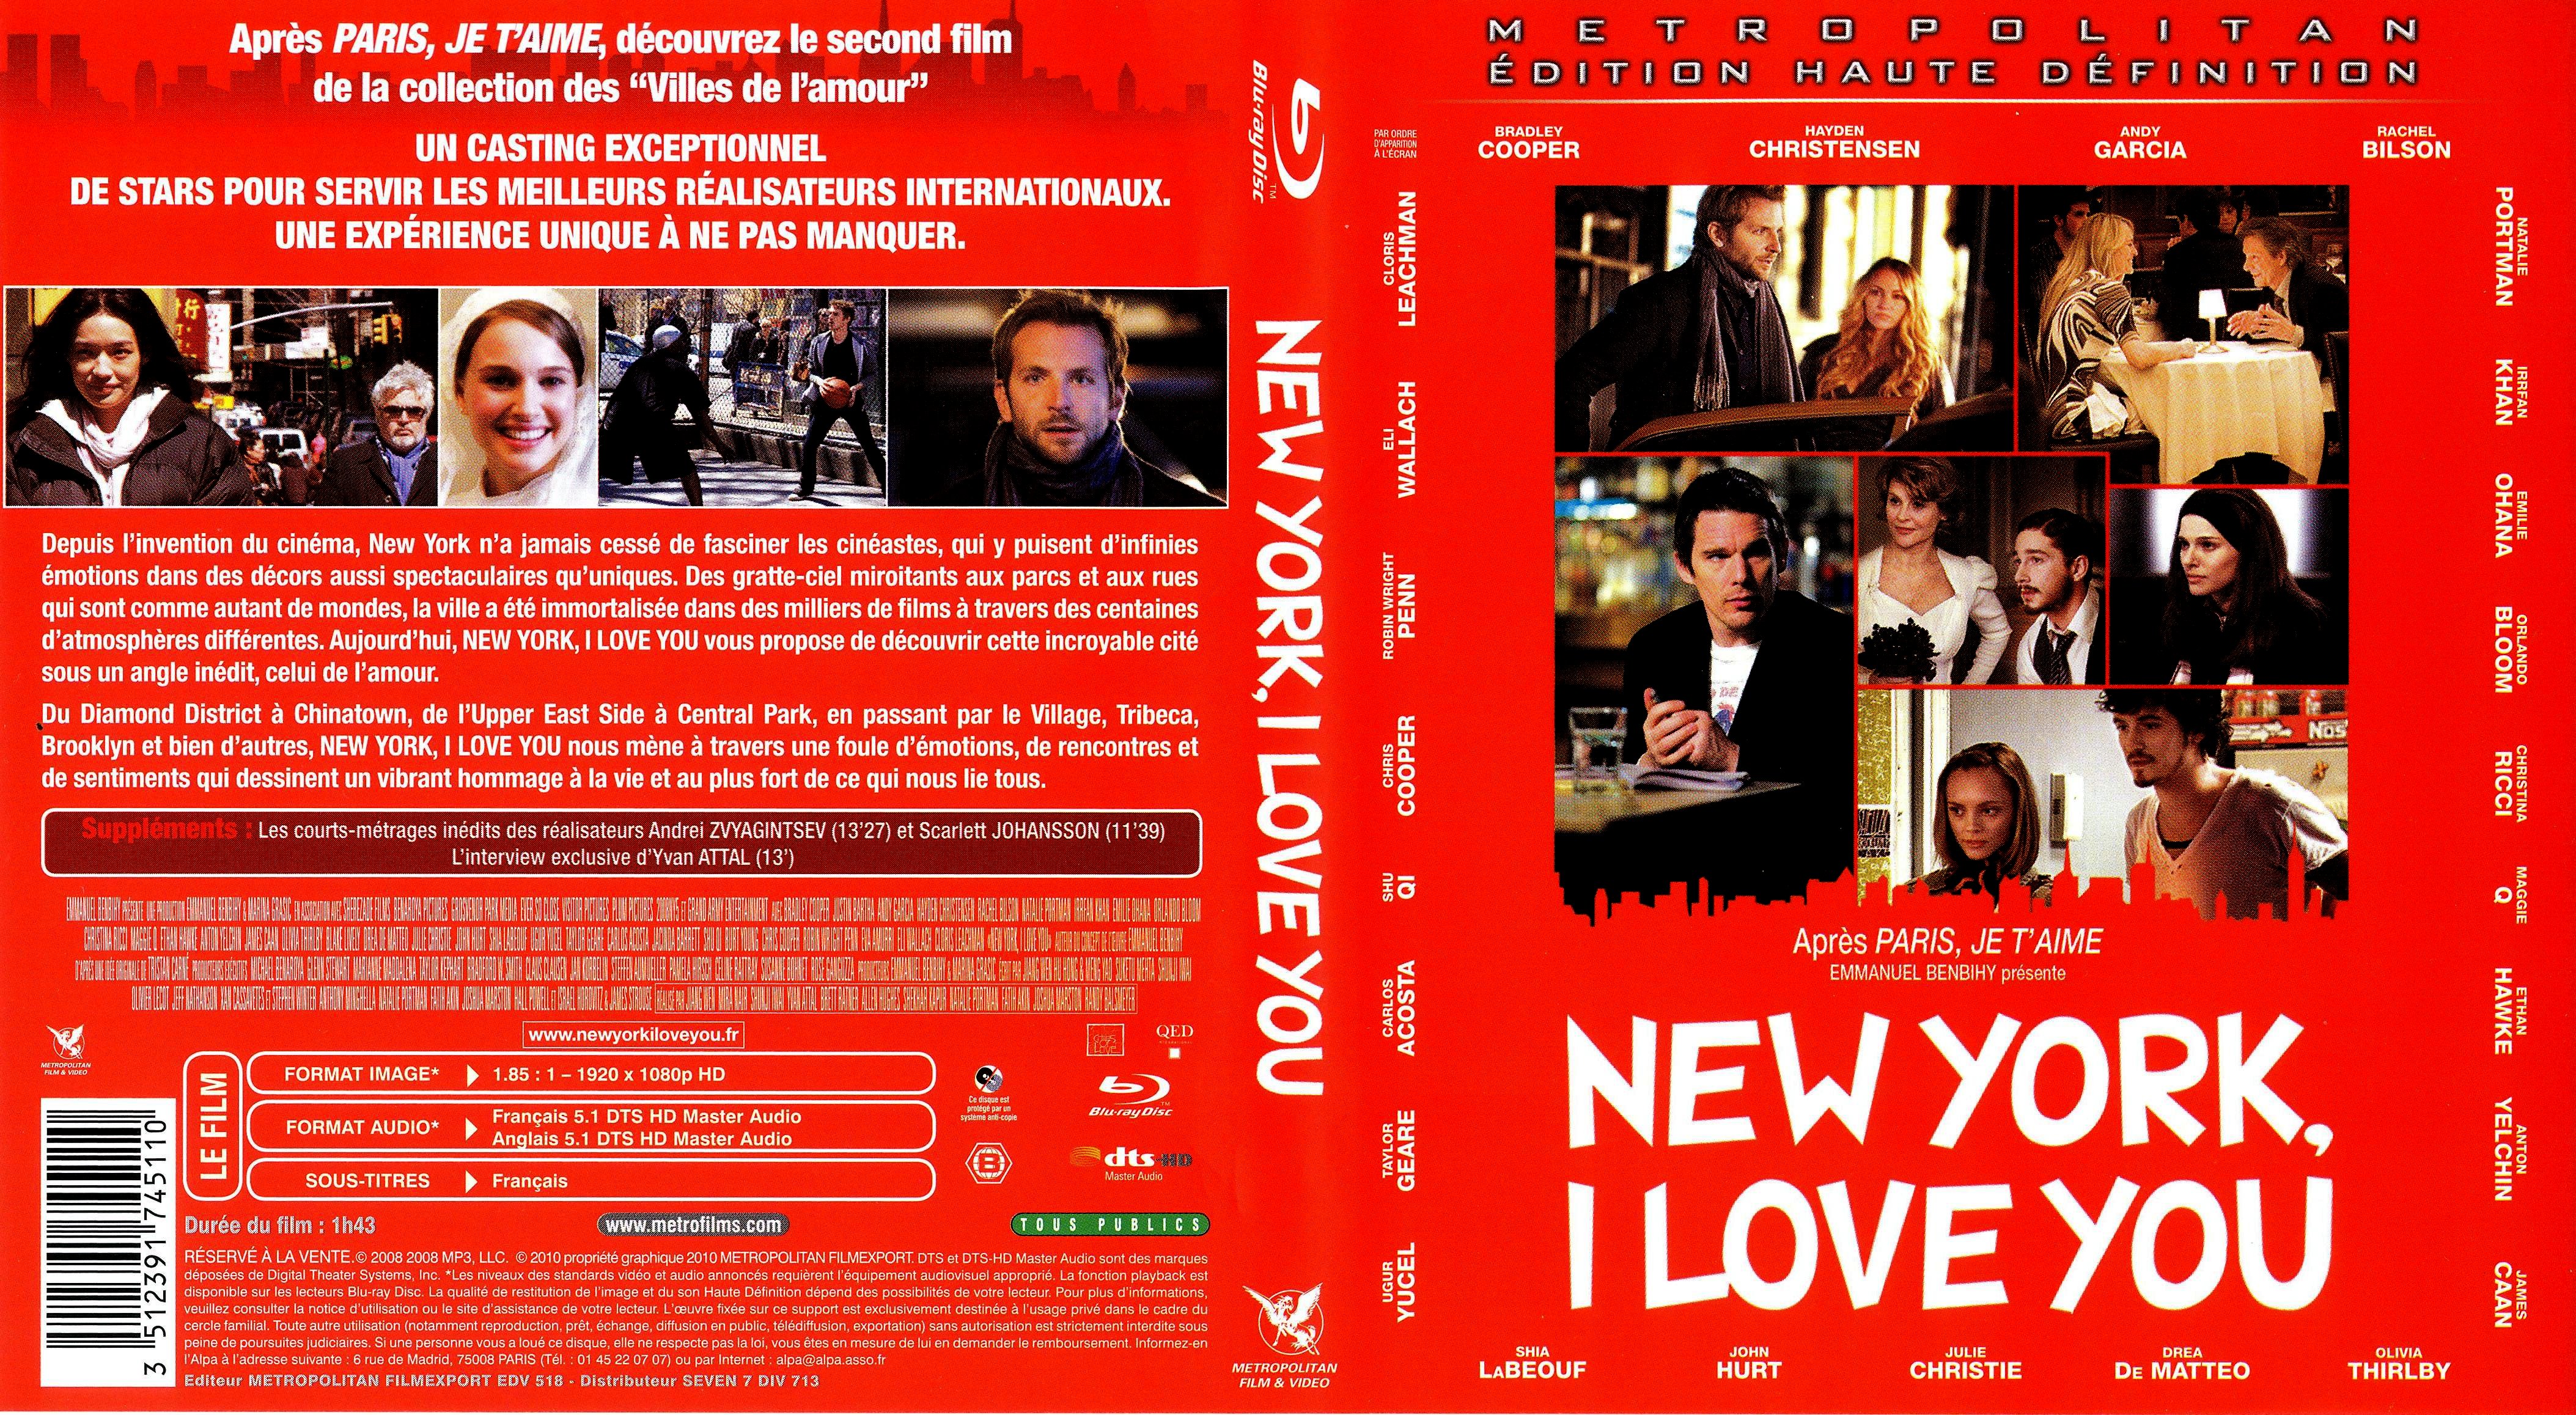 Jaquette DVD New York, i love you (BLU-RAY)